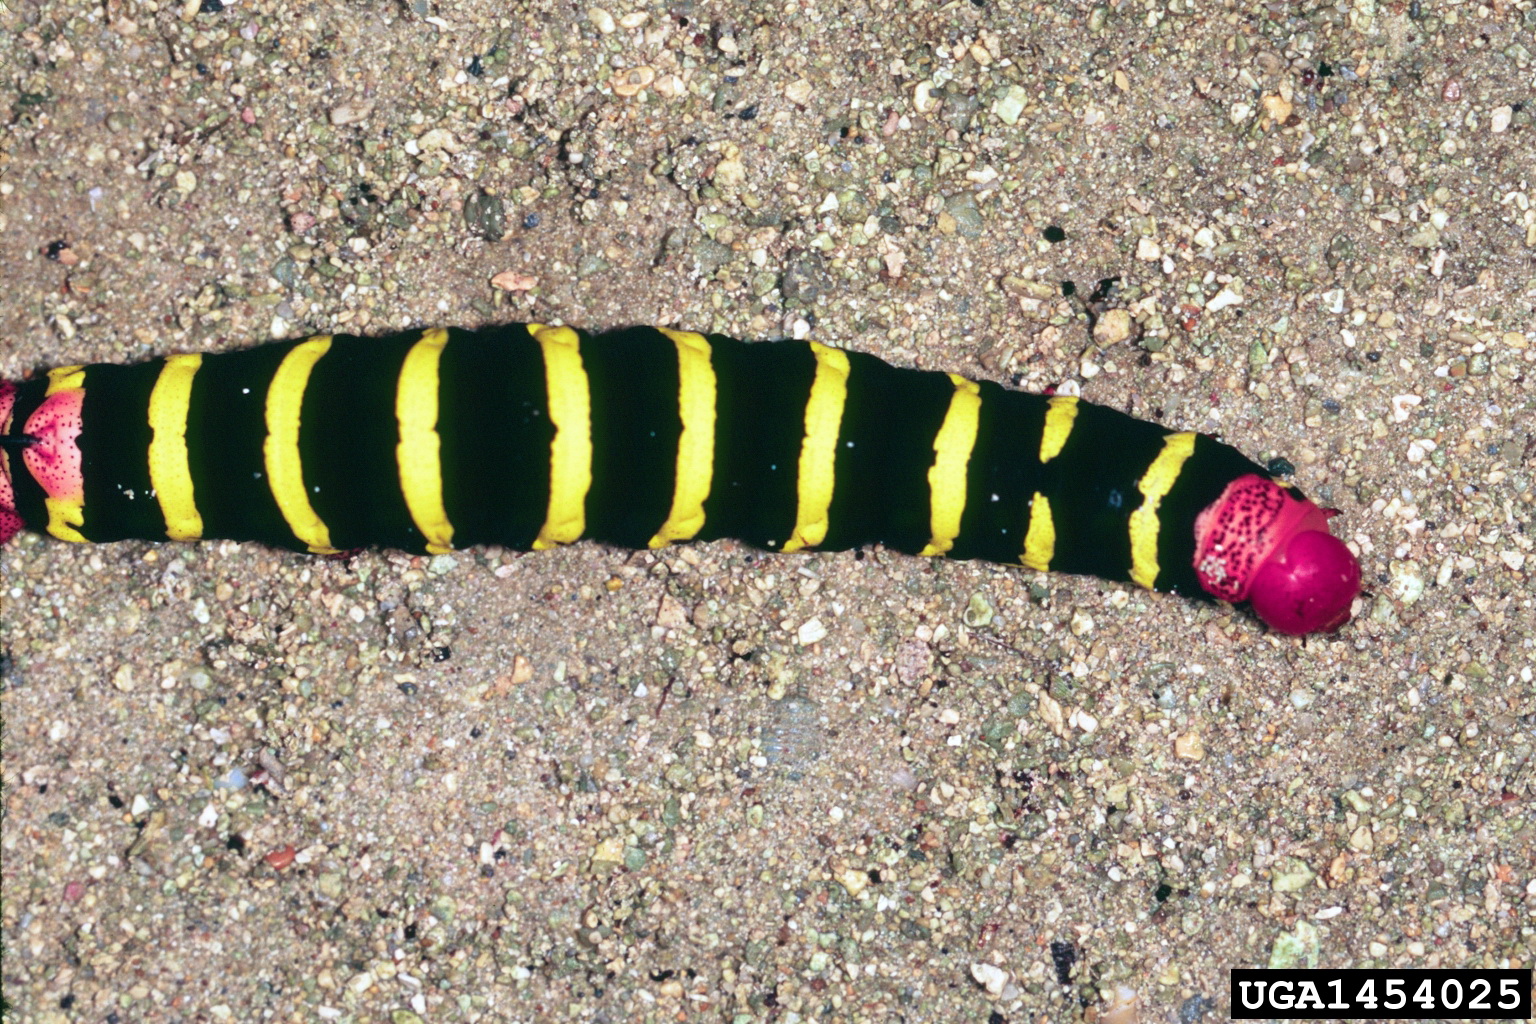 black caterpillar with yellow stripes with black head